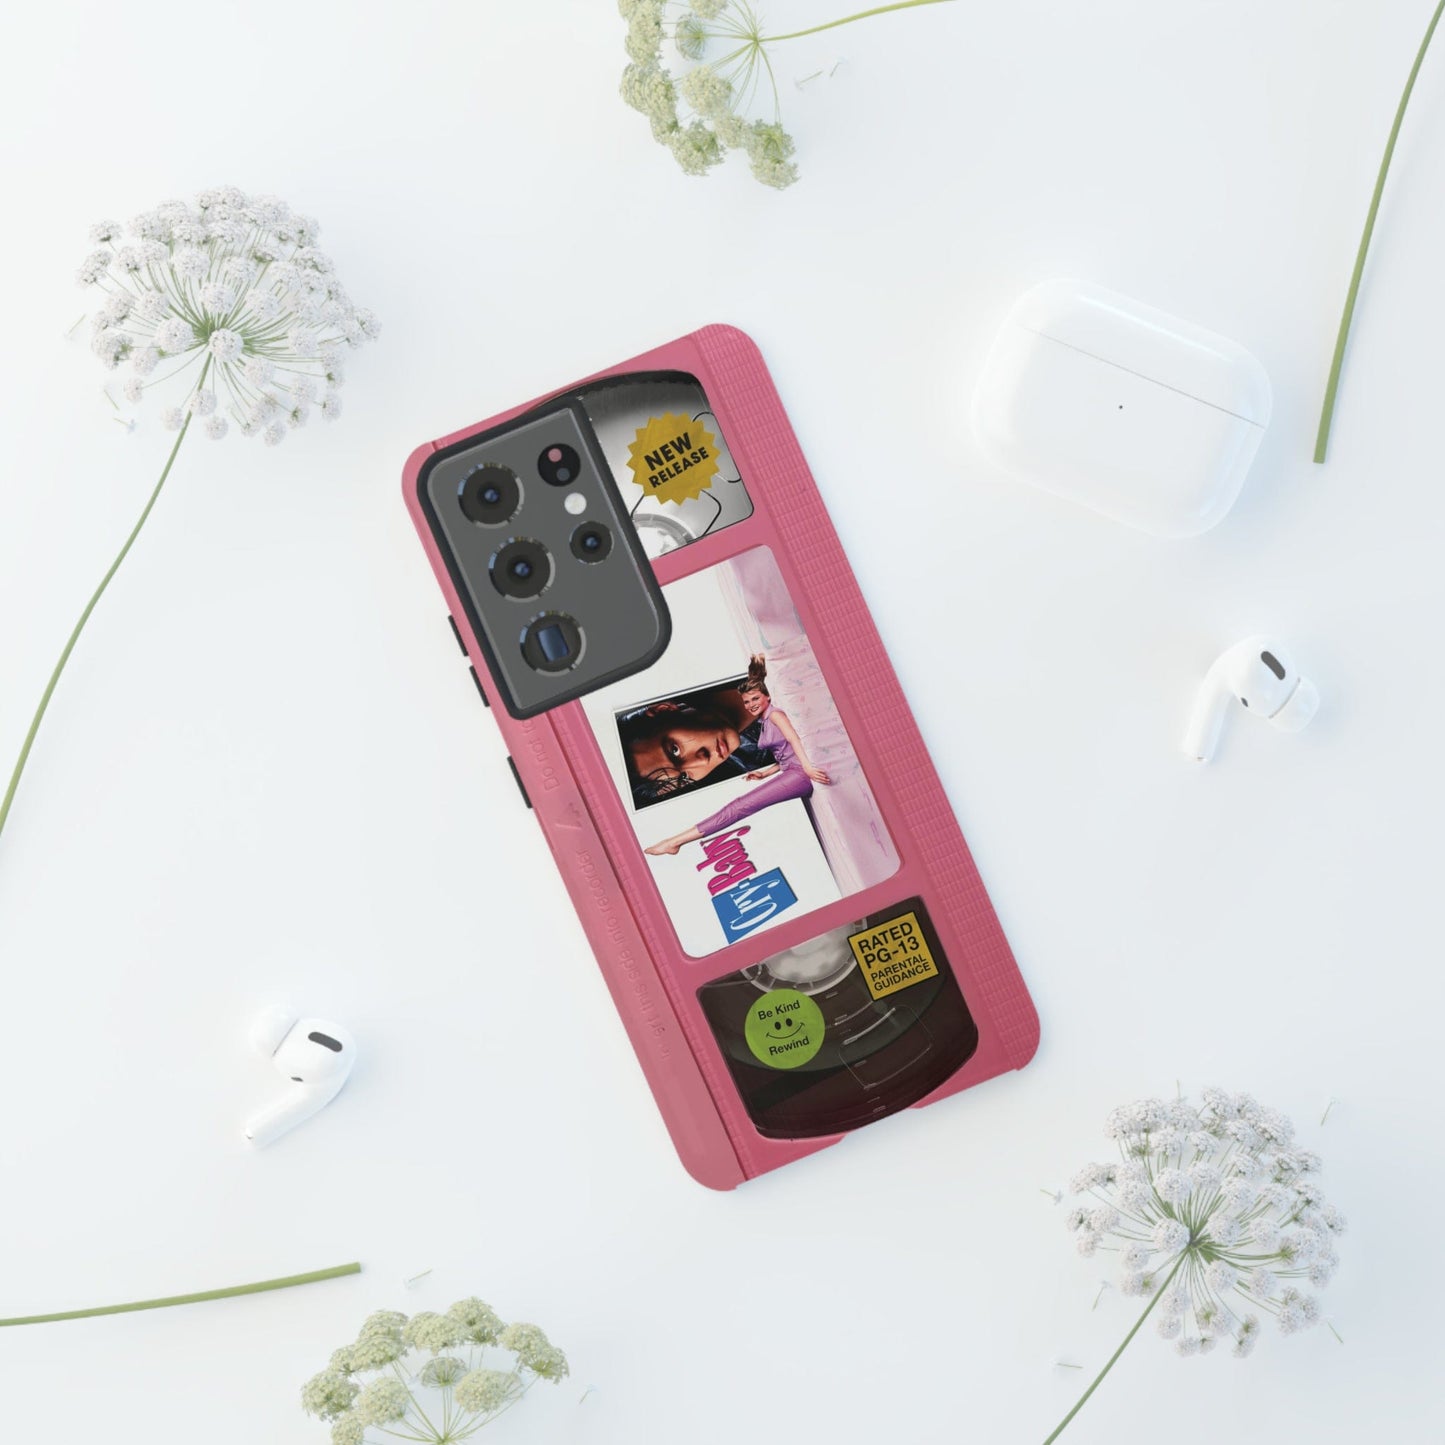 Cry Baby Pink Limited Edition Impact Resistant Vhs Phone Case